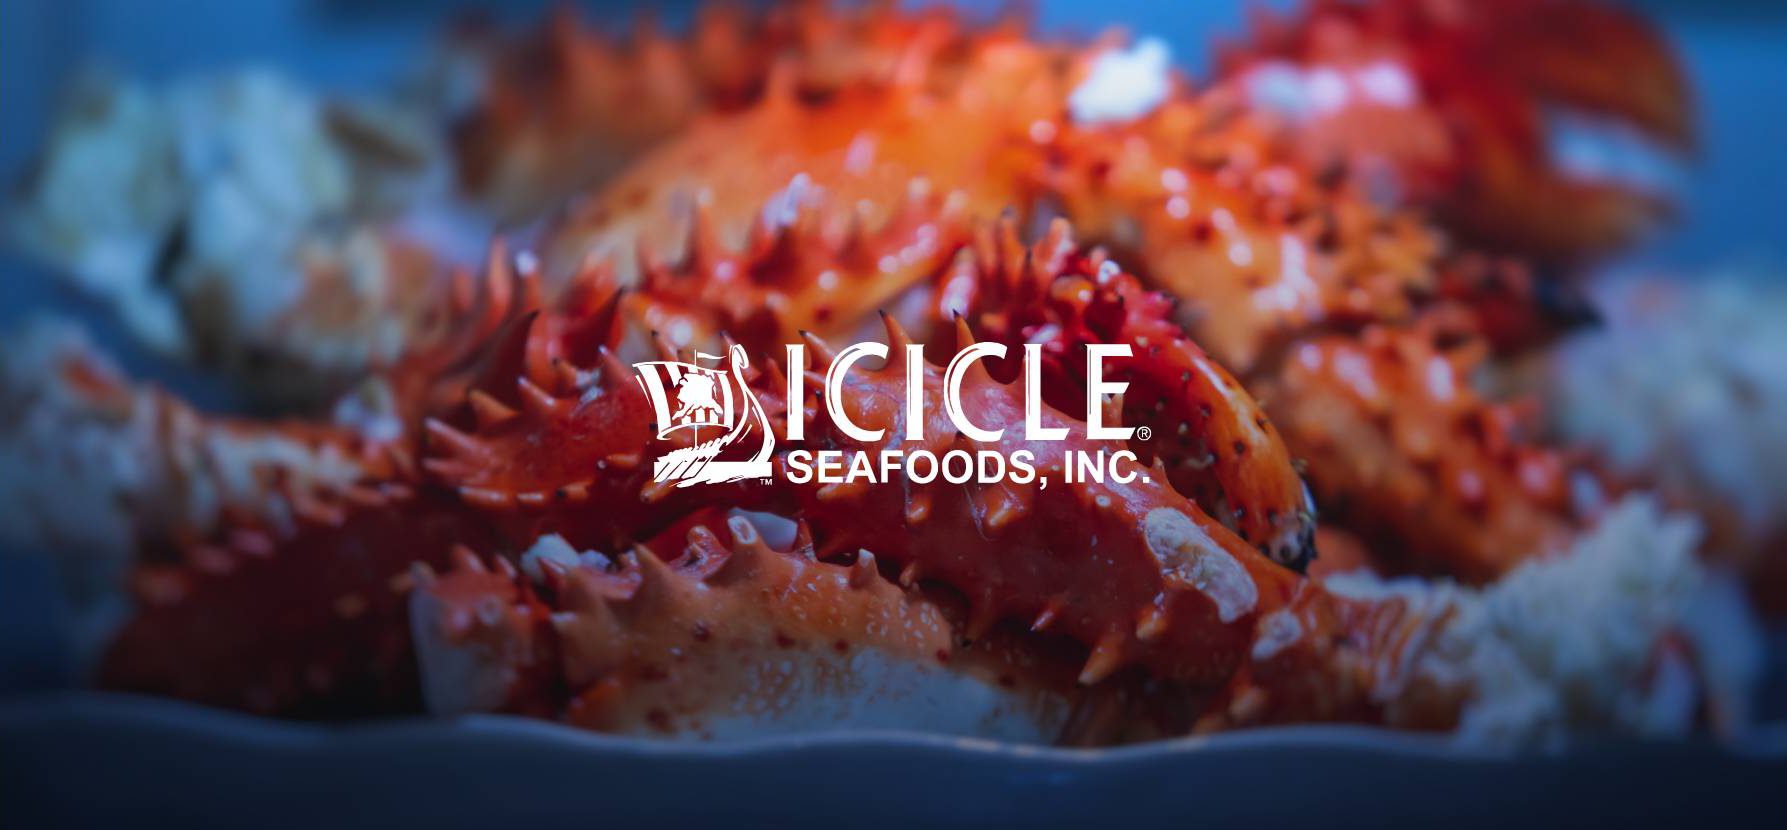 Paine & Partners Announces Termination of Agreements for the Sale of Icicle Seafoods@2x